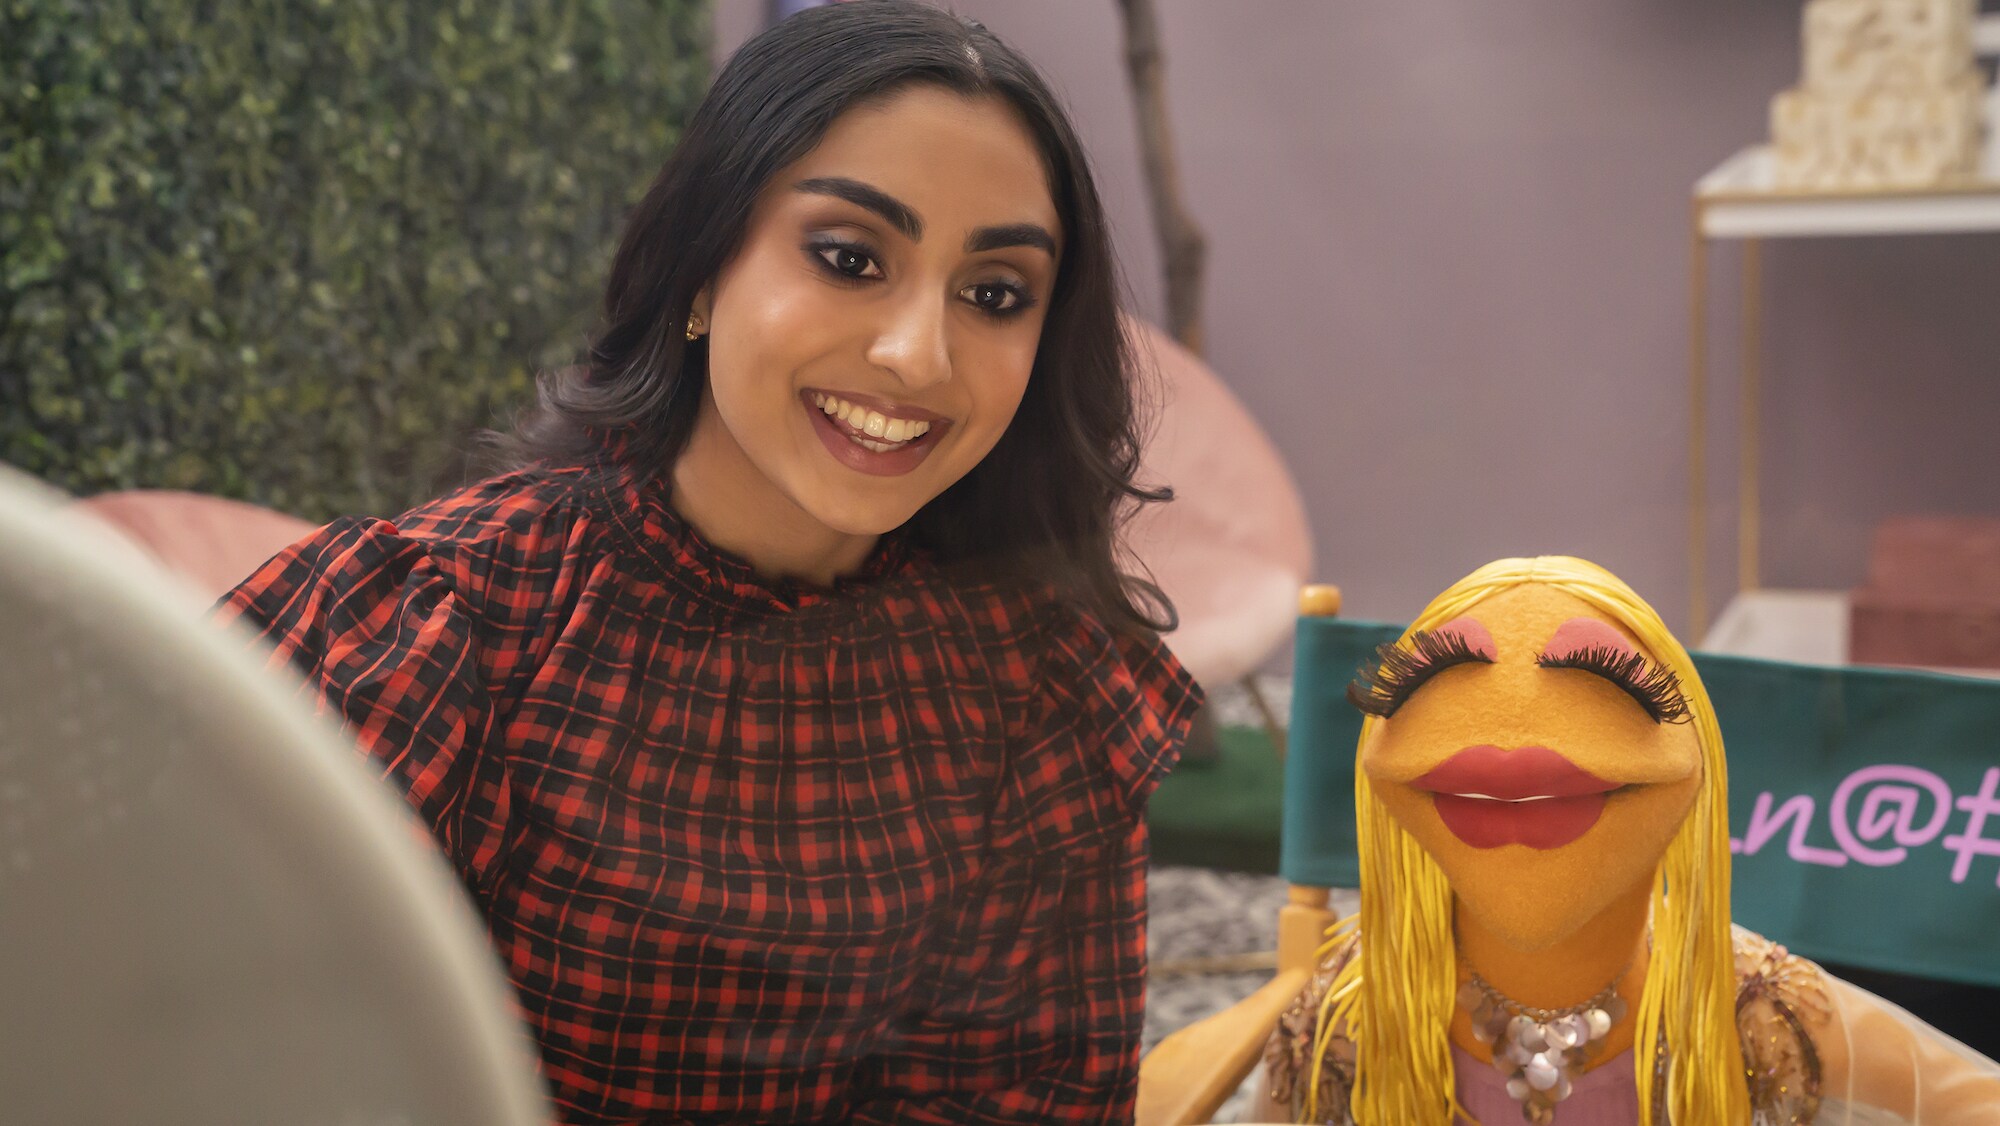 THE MUPPETS MAYHEM -  “Track 4: The Times They Are A-Changin” (Disney/Mitch Haaseth) SAARA CHAUDRY, JANICE